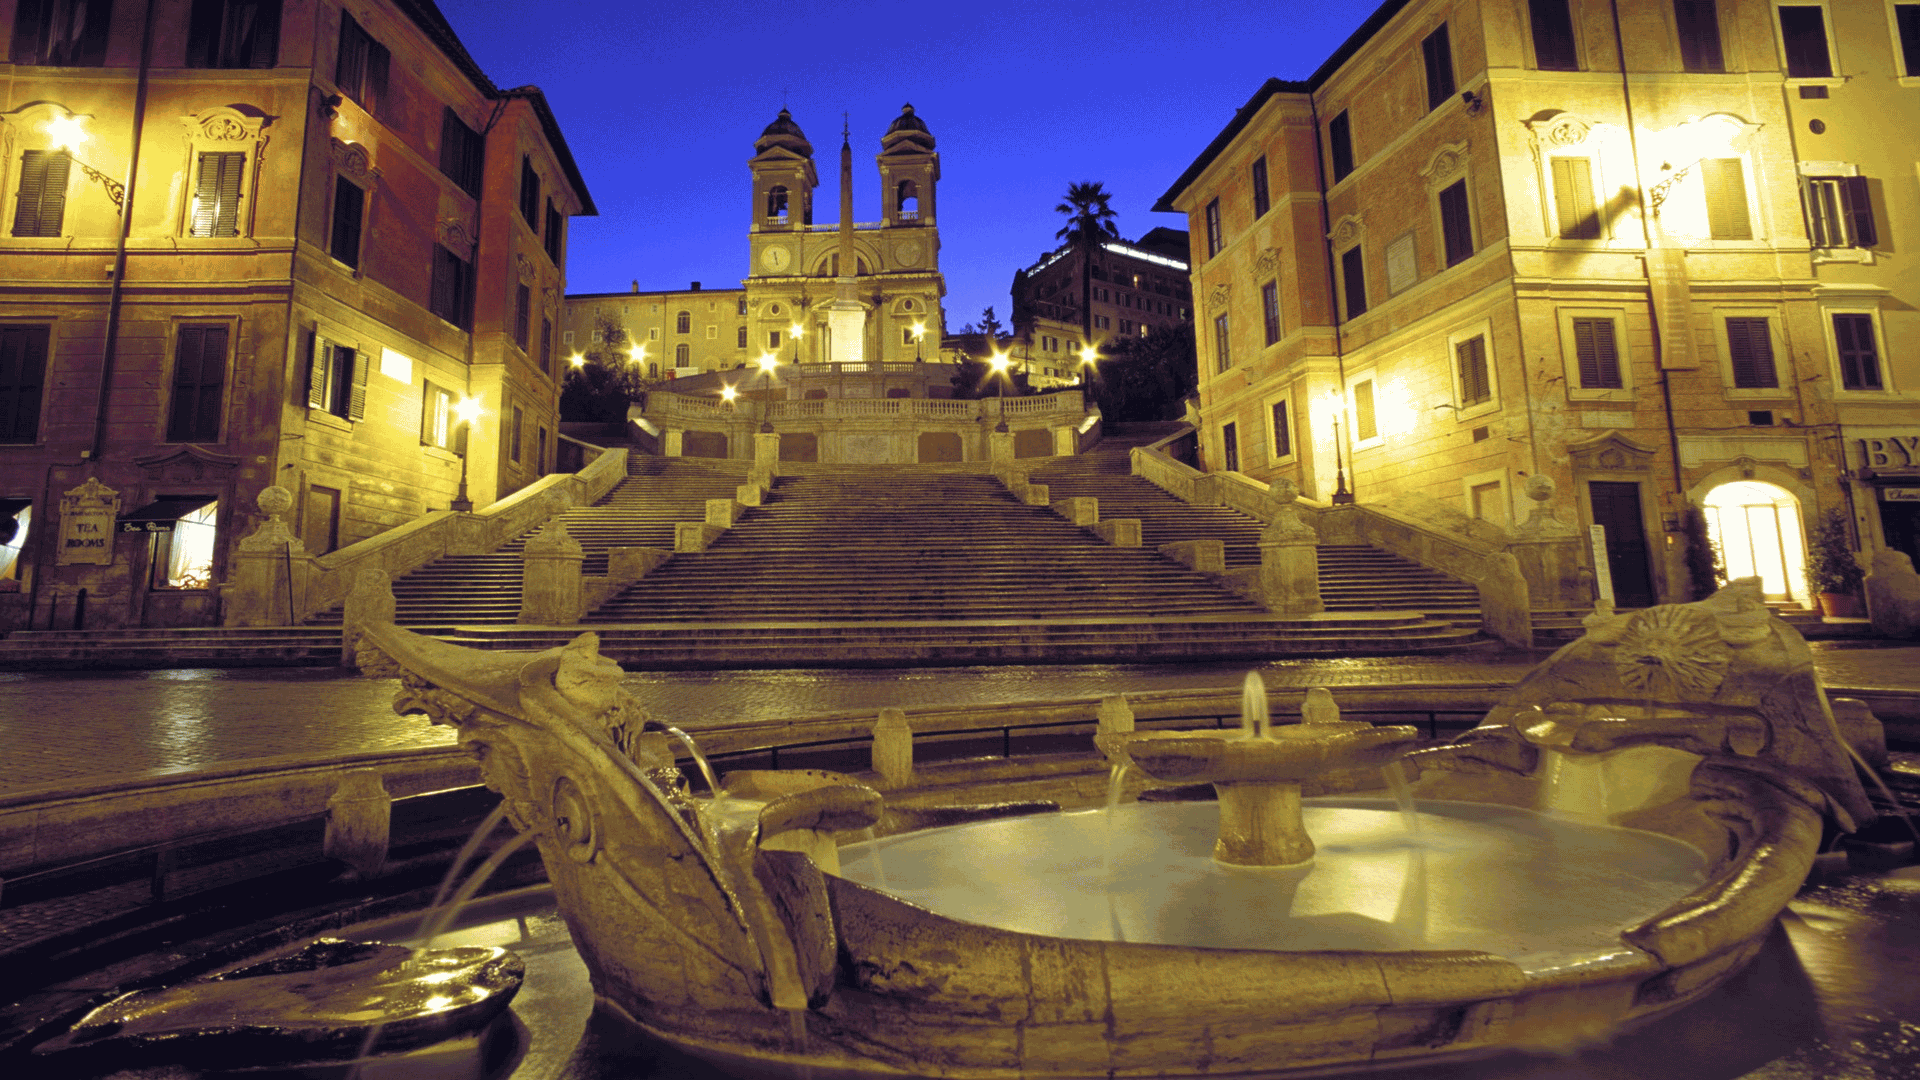 The Fountain And Spanish Steps At Night